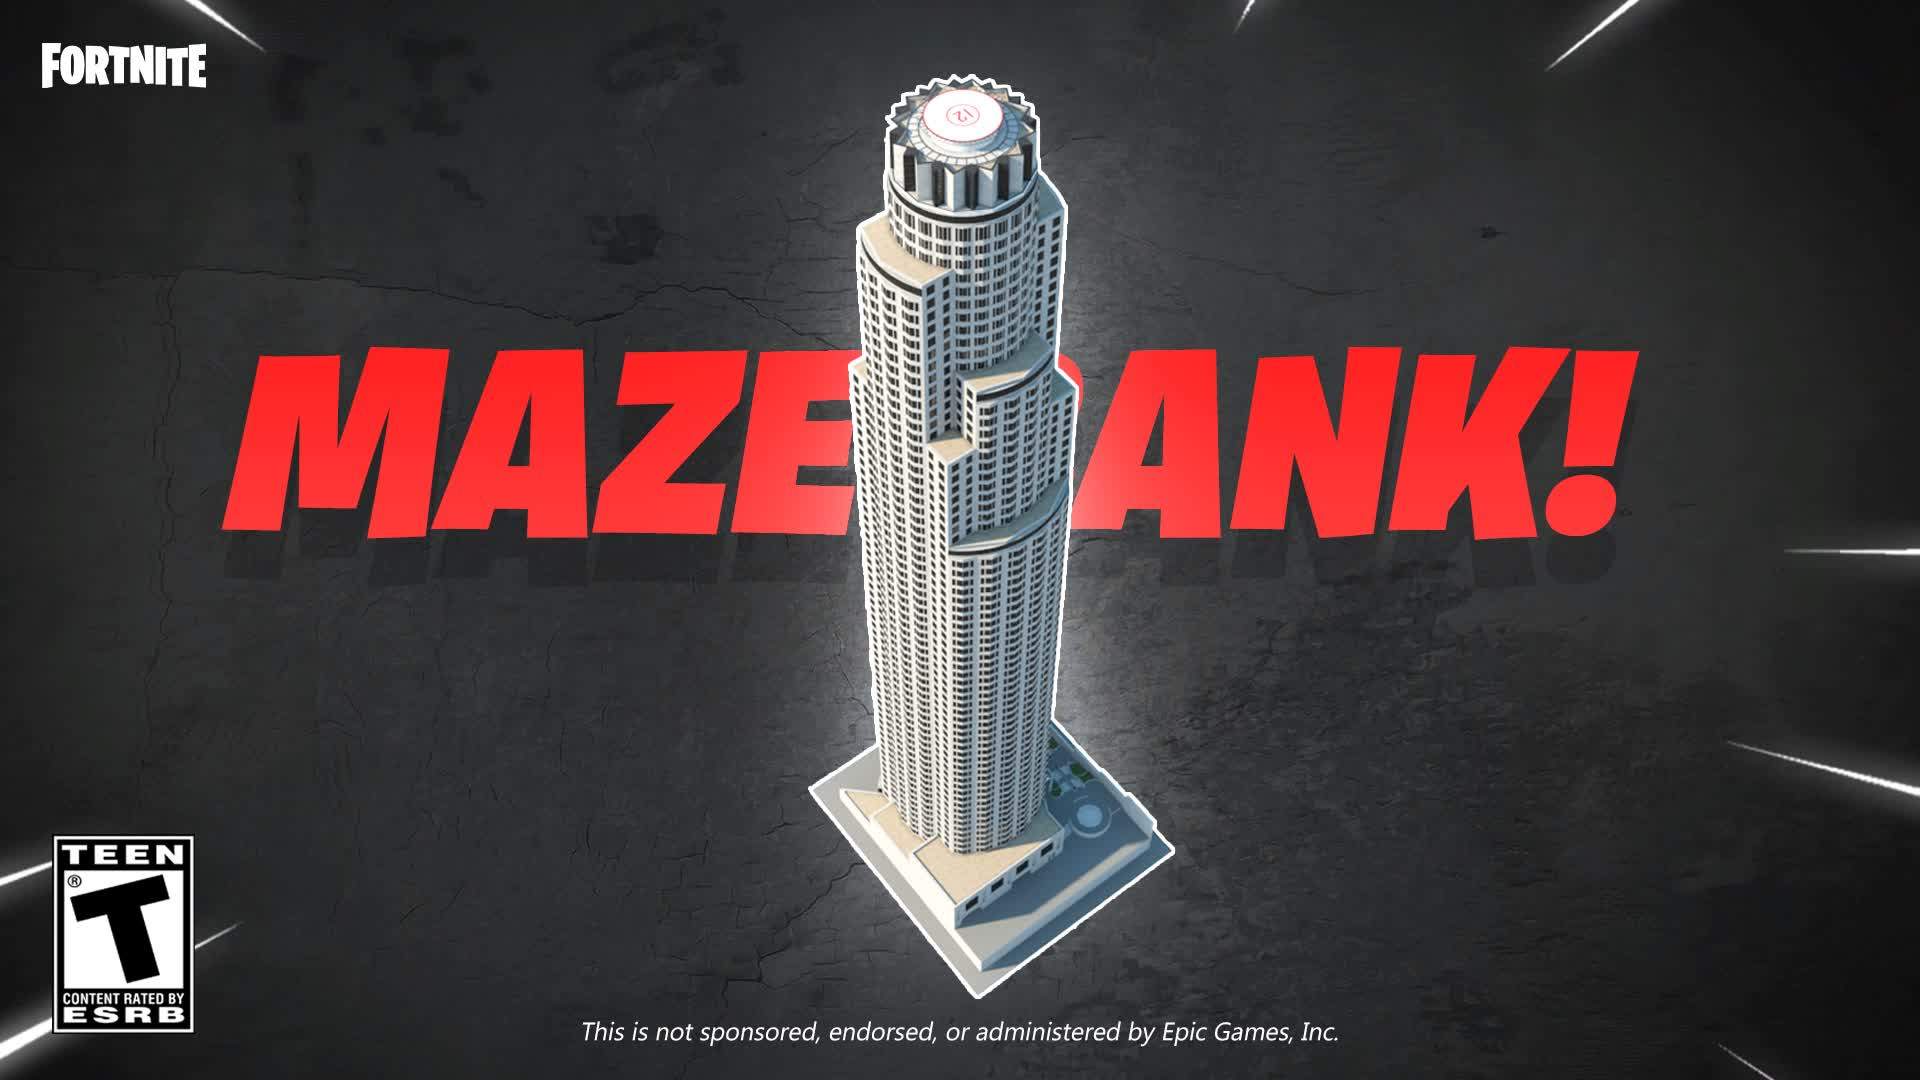 🏦 Maze Bank - FREE FOR ALL 🏦